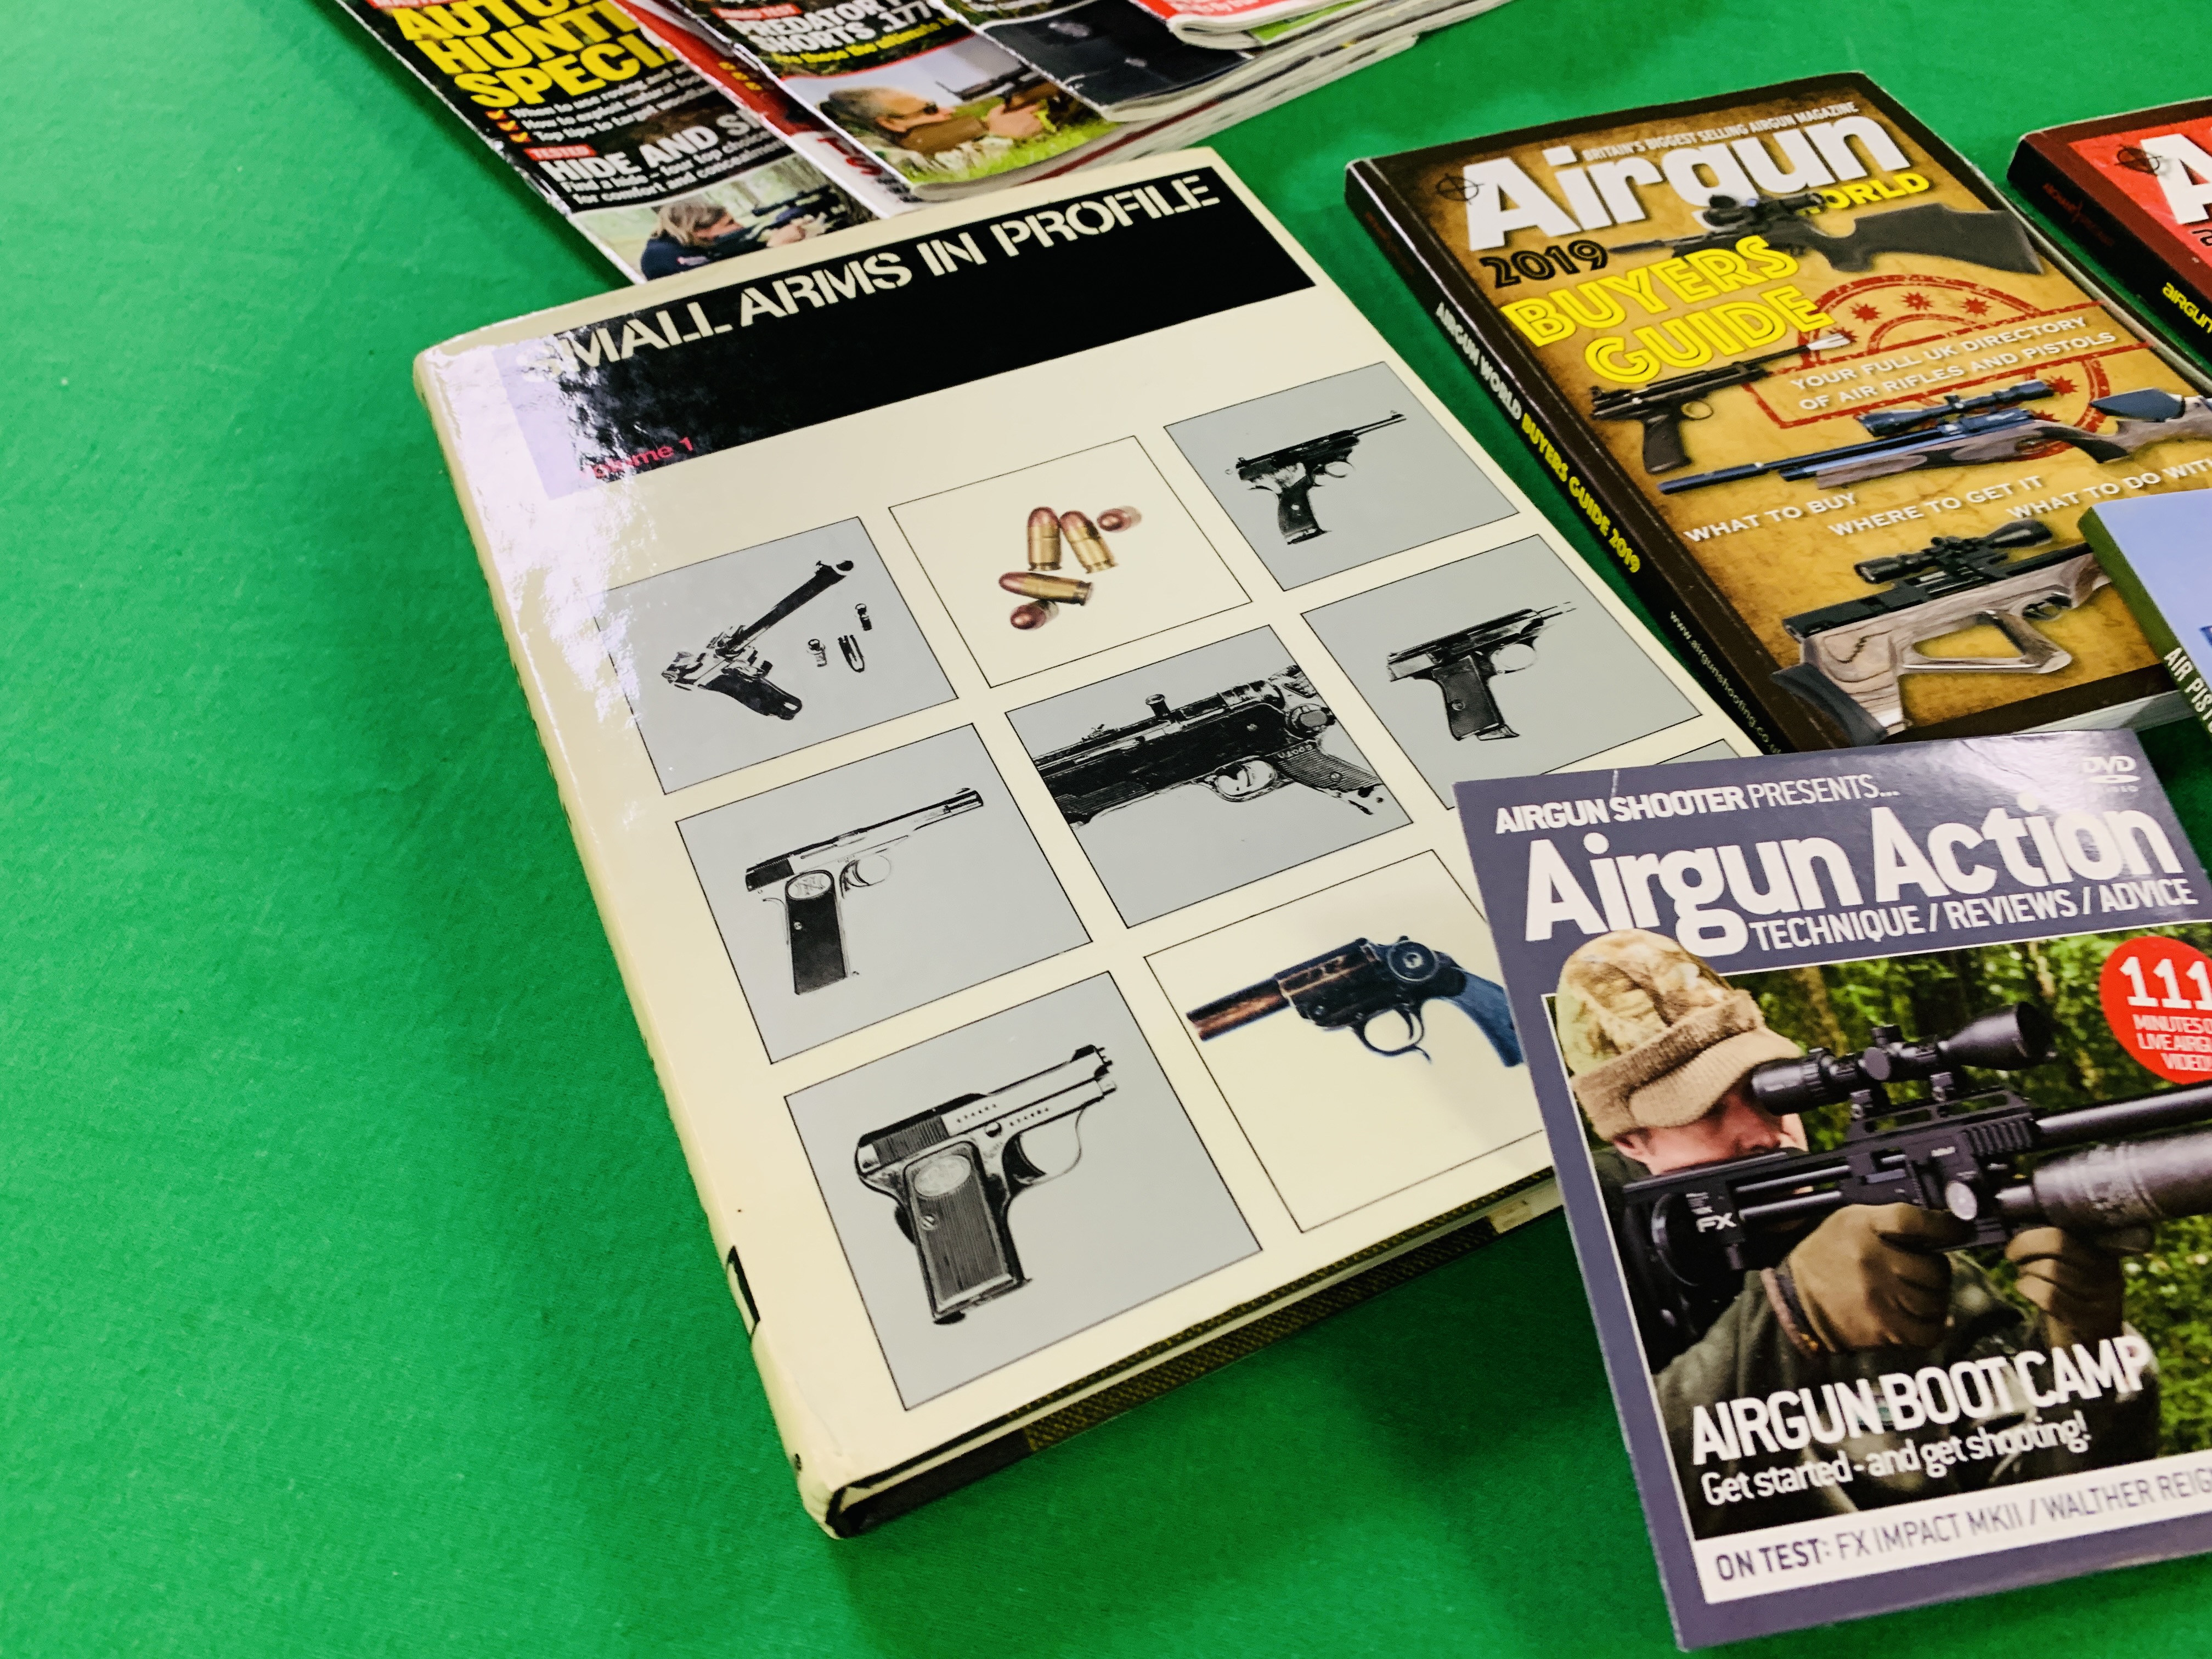 A COLLECTION OF 6 BOOKS RELATING TO GUNS TO INCLUDE THE HAYES HAND GUN OMNIBUS SMALL ARMS IN - Image 5 of 7